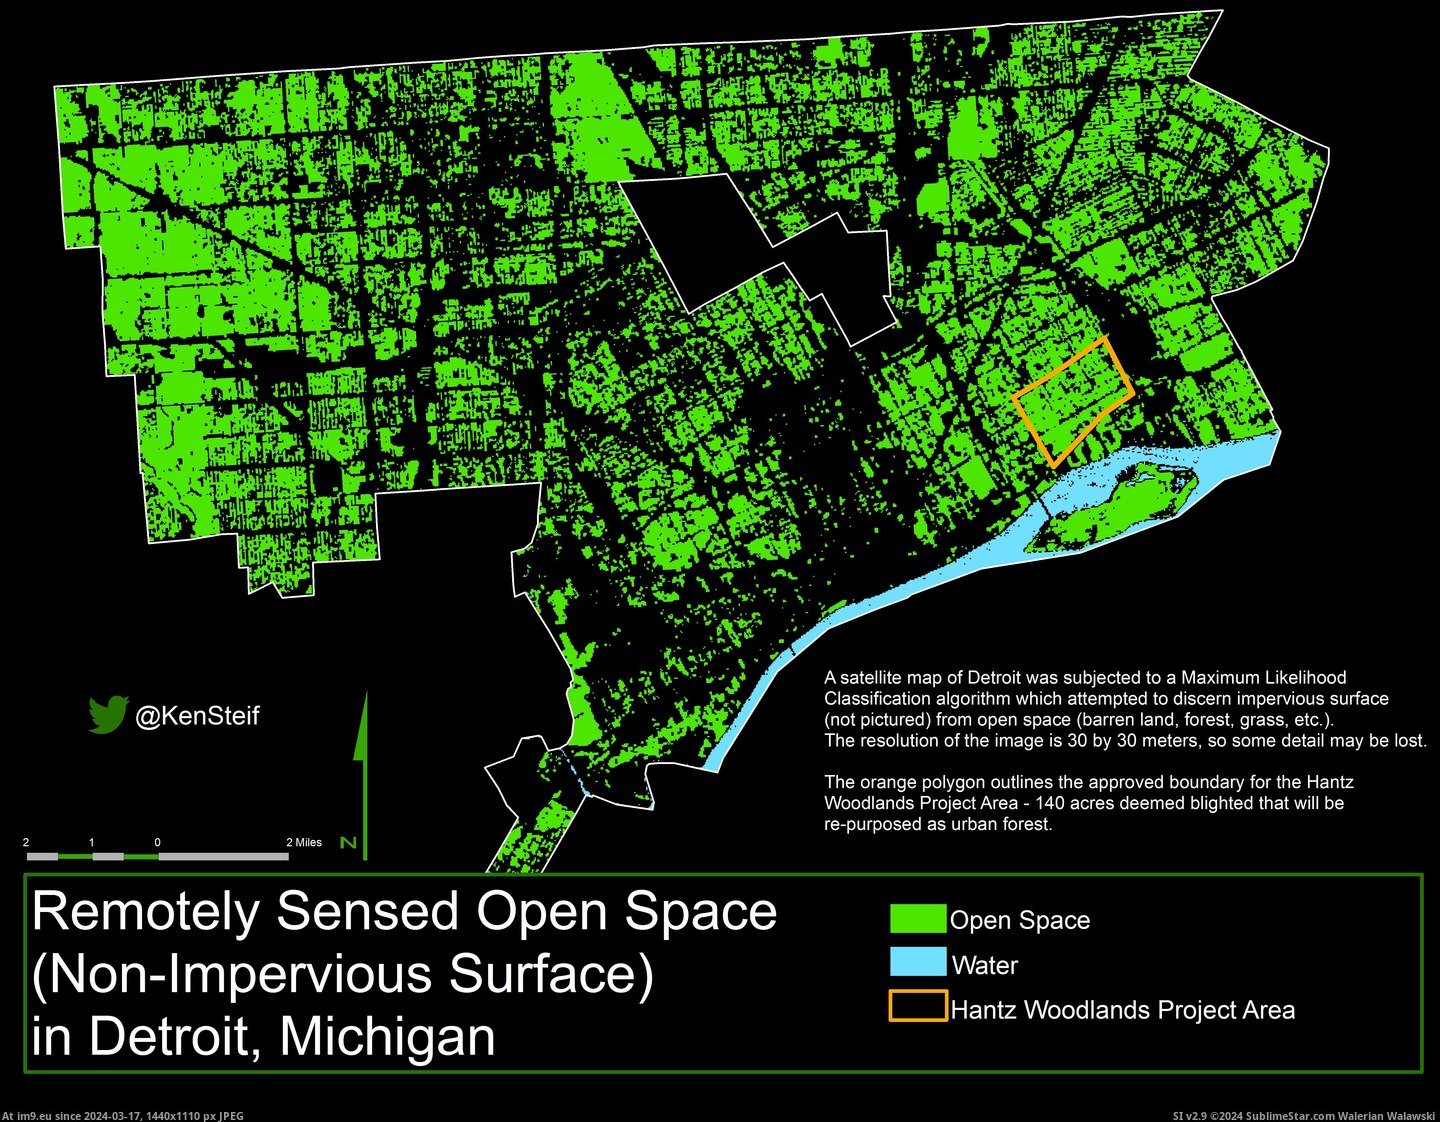 #Space #Detroit #Vacant #Land [Mapporn] Open Space-Vacant Land in Detroit [850 x 650] Pic. (Изображение из альбом My r/MAPS favs))